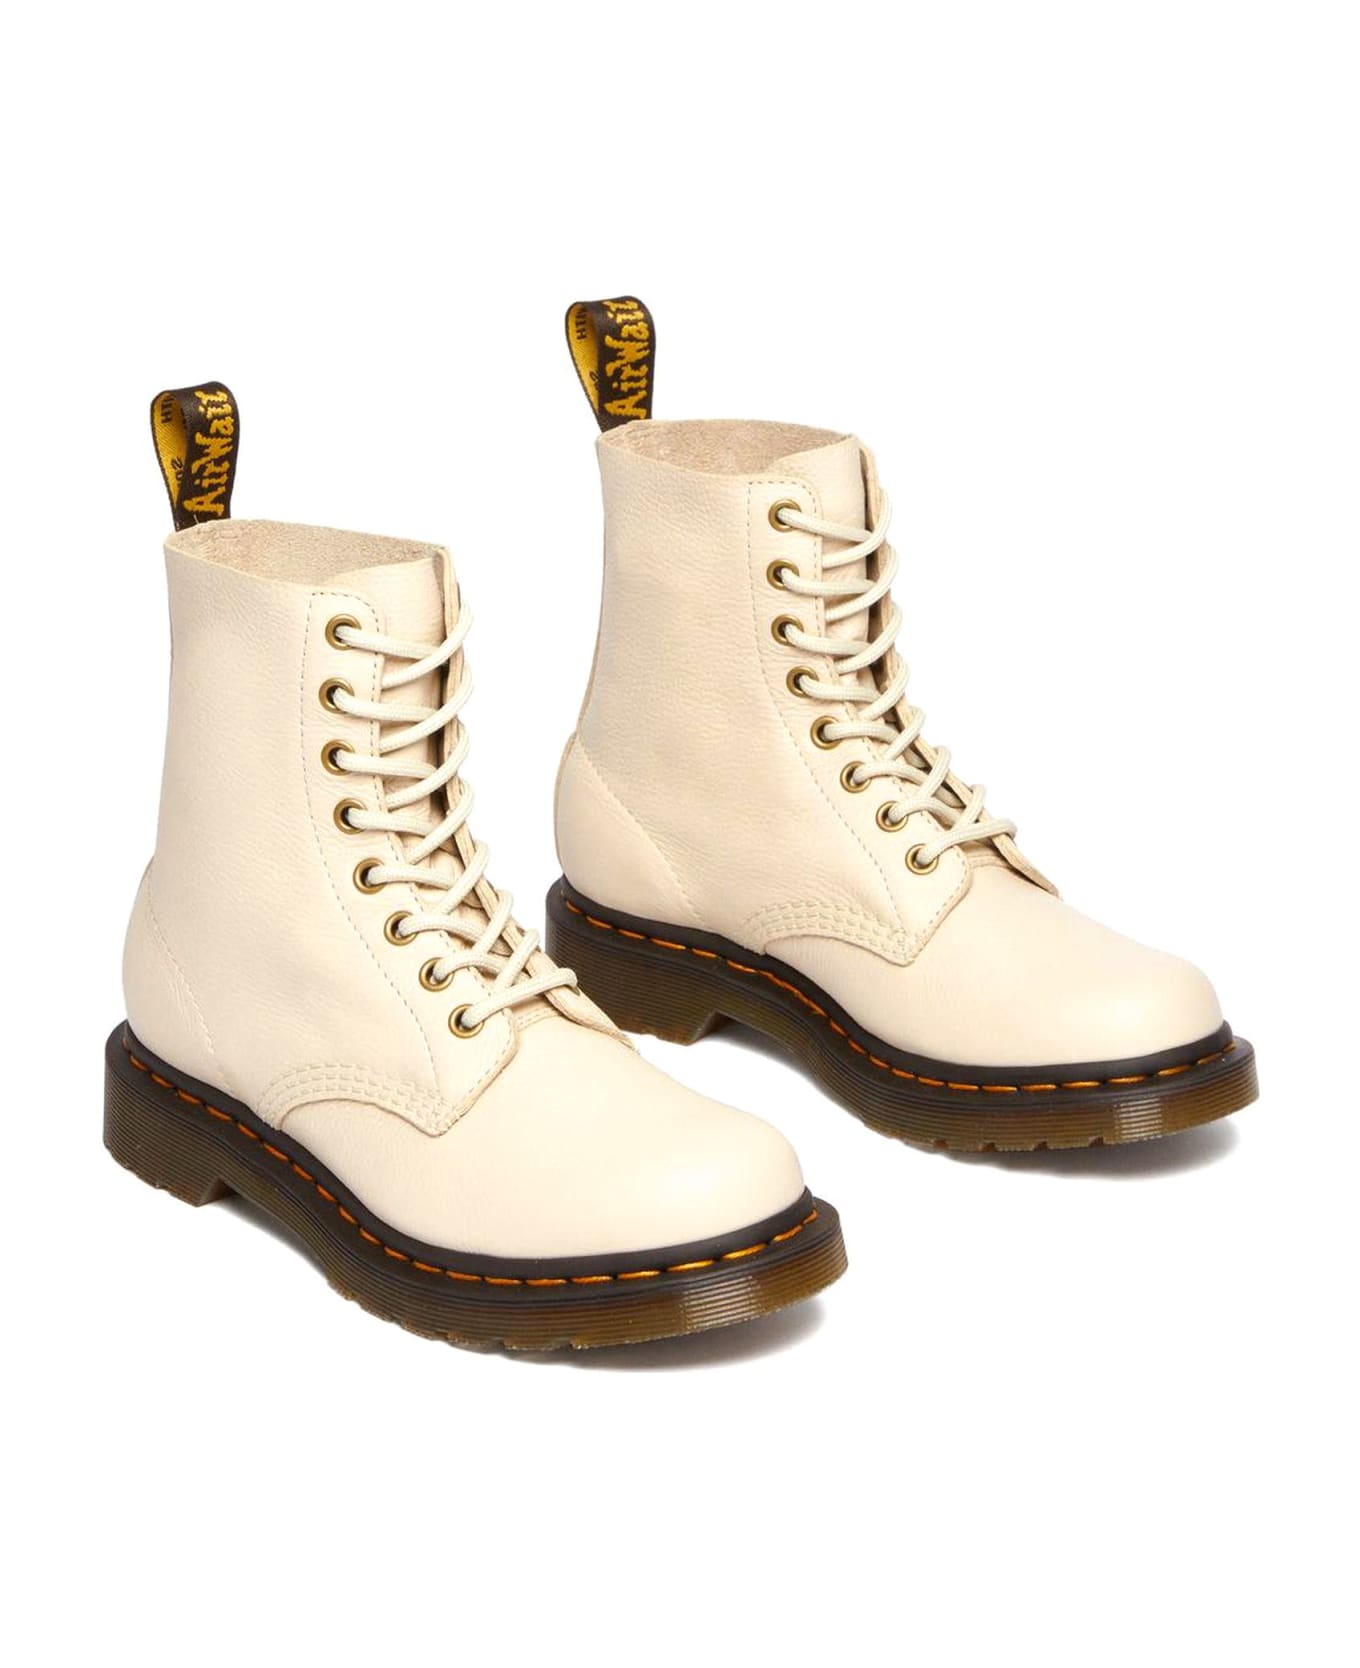 Dr. Martens Beige Leather Pascal Virginia Boots - beige